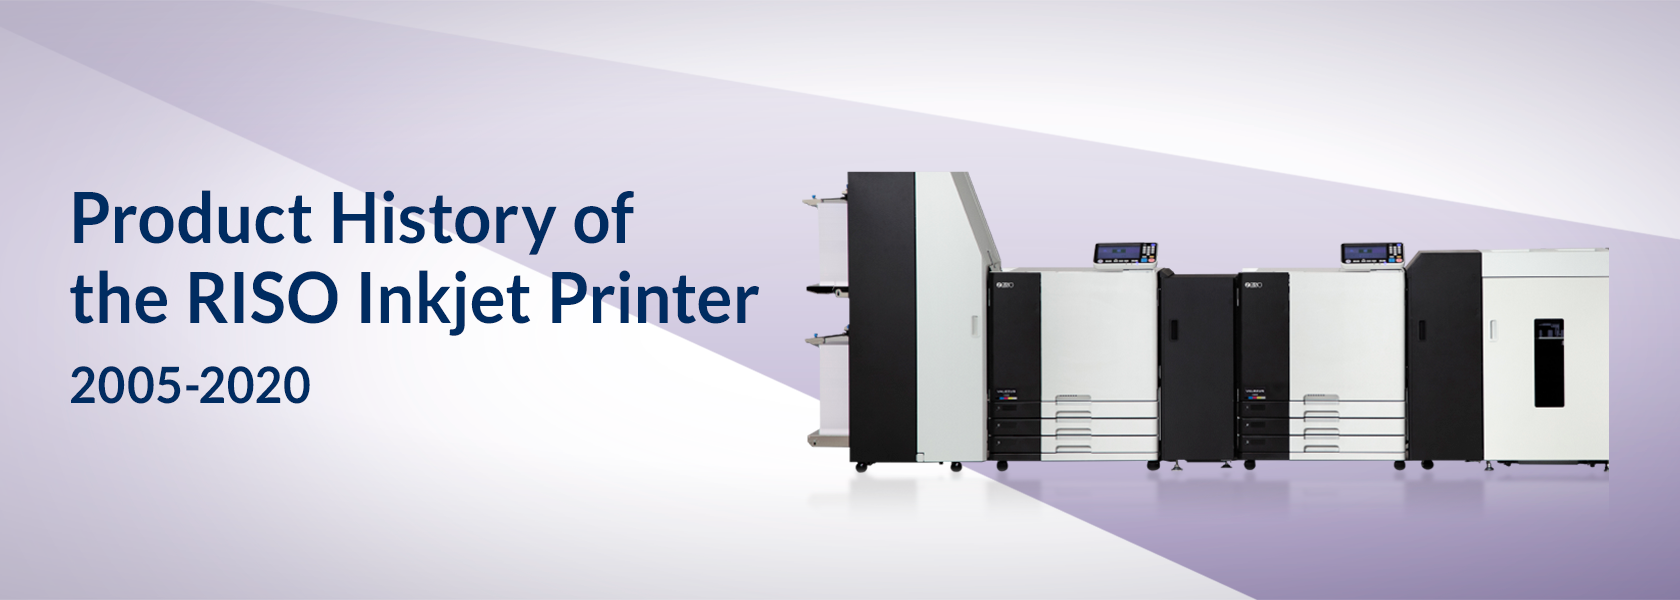 Product History of the RISO Inkjet Printer